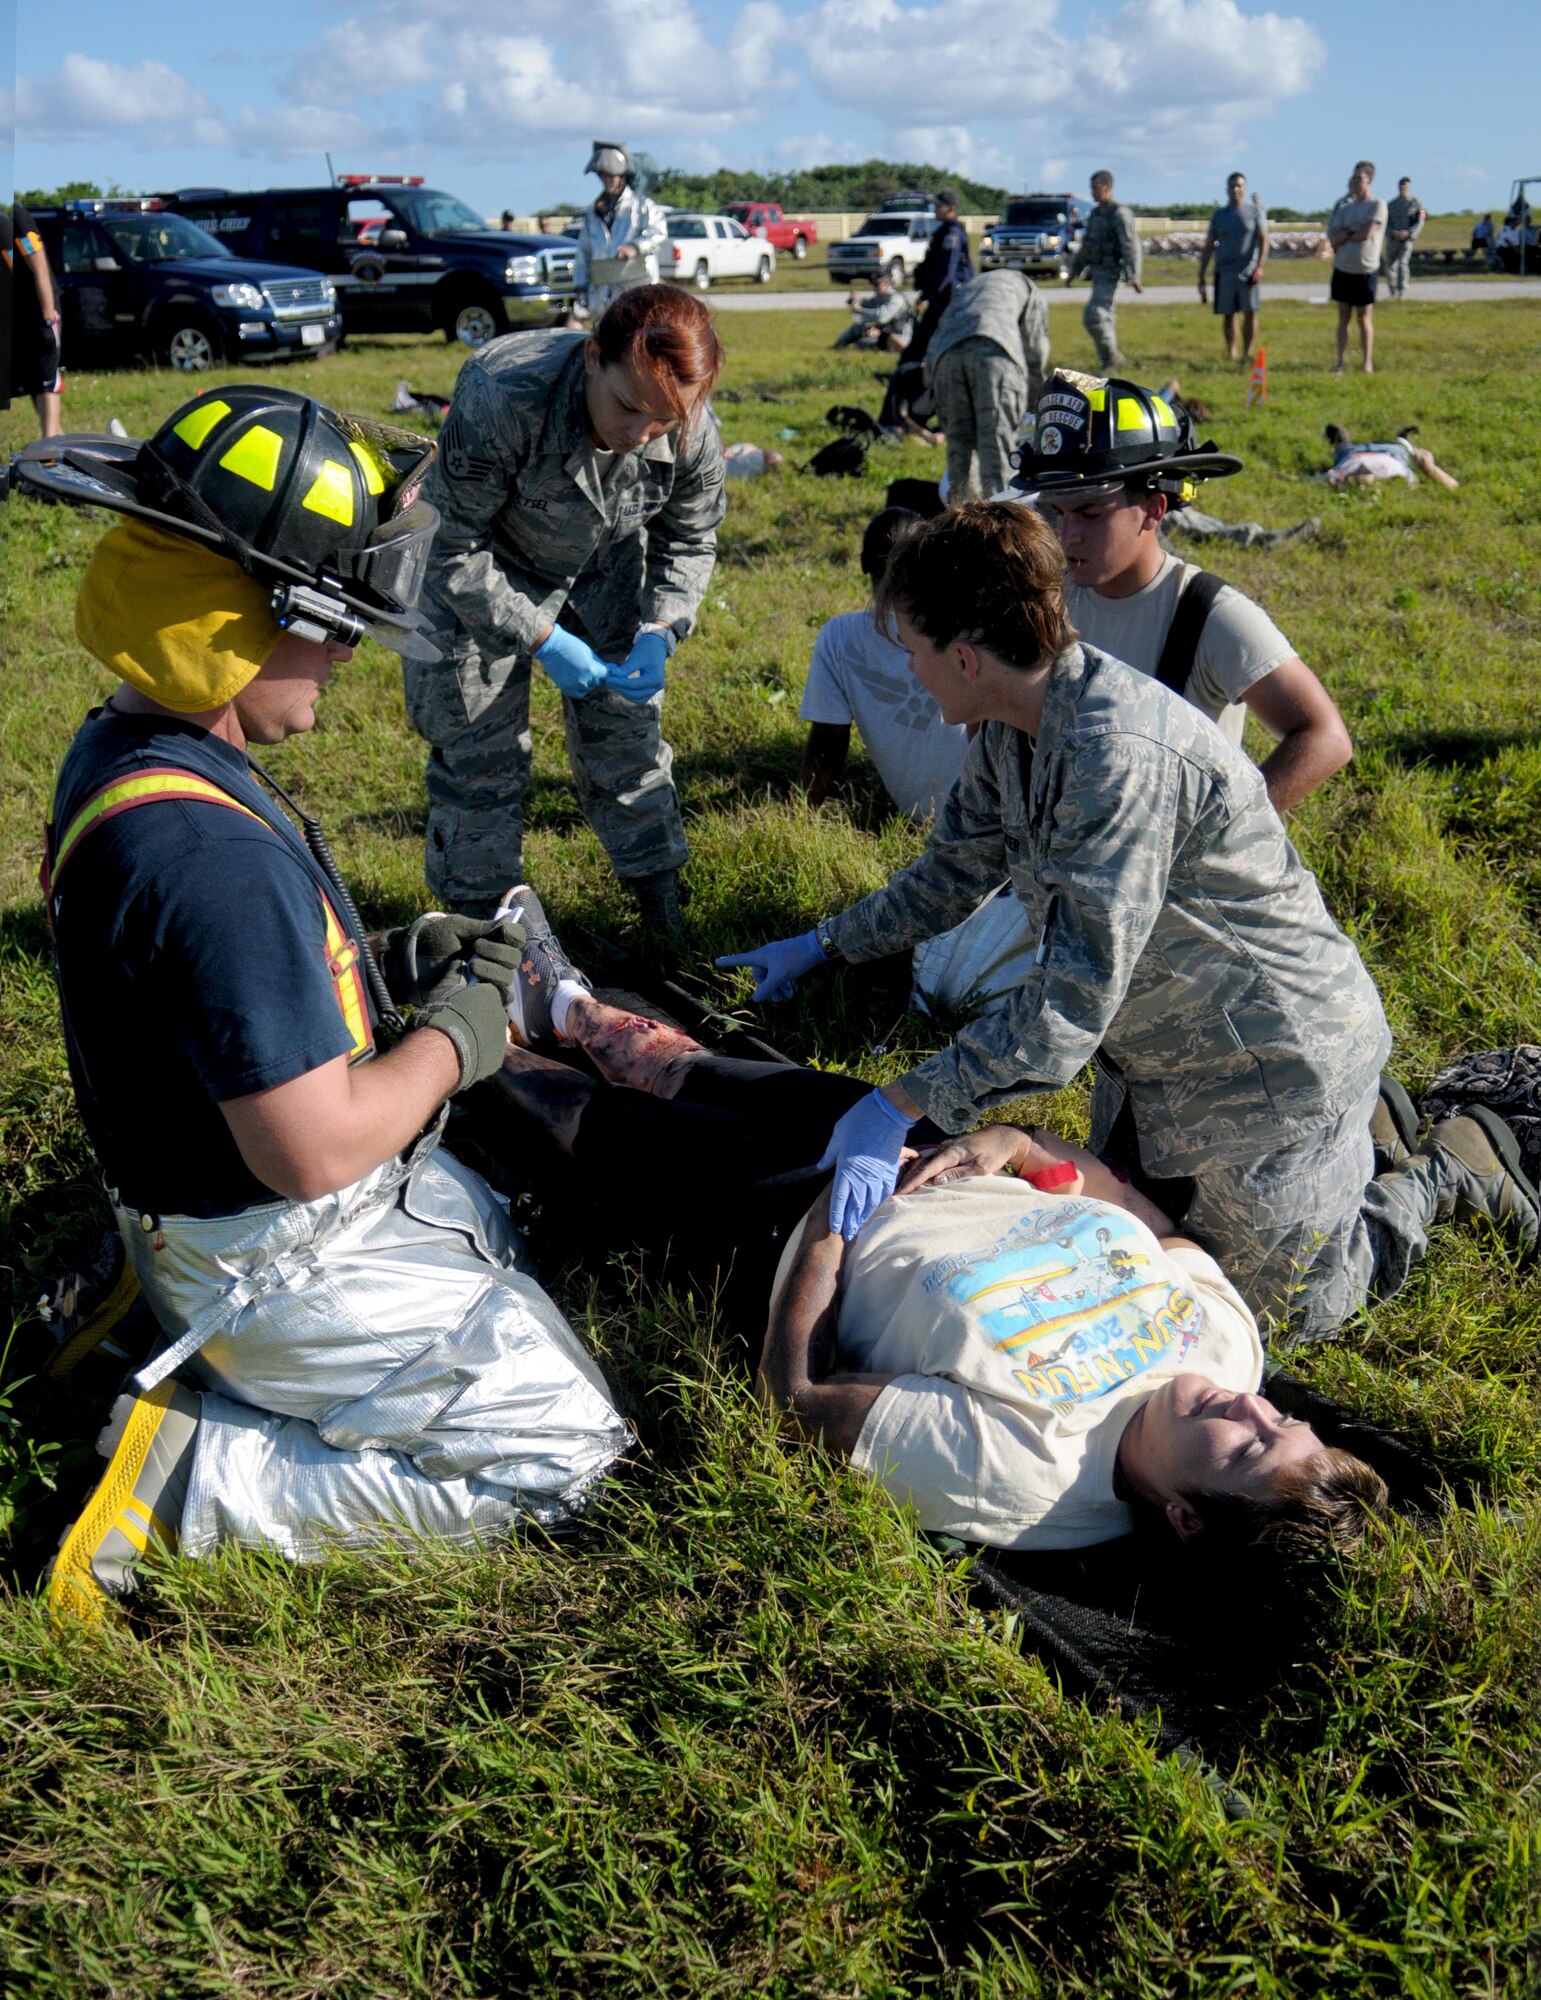 Participating Airmen and emergency response personnel respond to a simulated C-17 crash near the runway during a joint exercise Jan. 30. The exercise was unique because not only did Airmen carry out emergency response procedures, they also completed the initial steps for recovery and, for the first time, provided the necessary products to initiate a safety investigation board. (U.S. Air Force photo/Senior Airman Jeffrey Schultze) 

